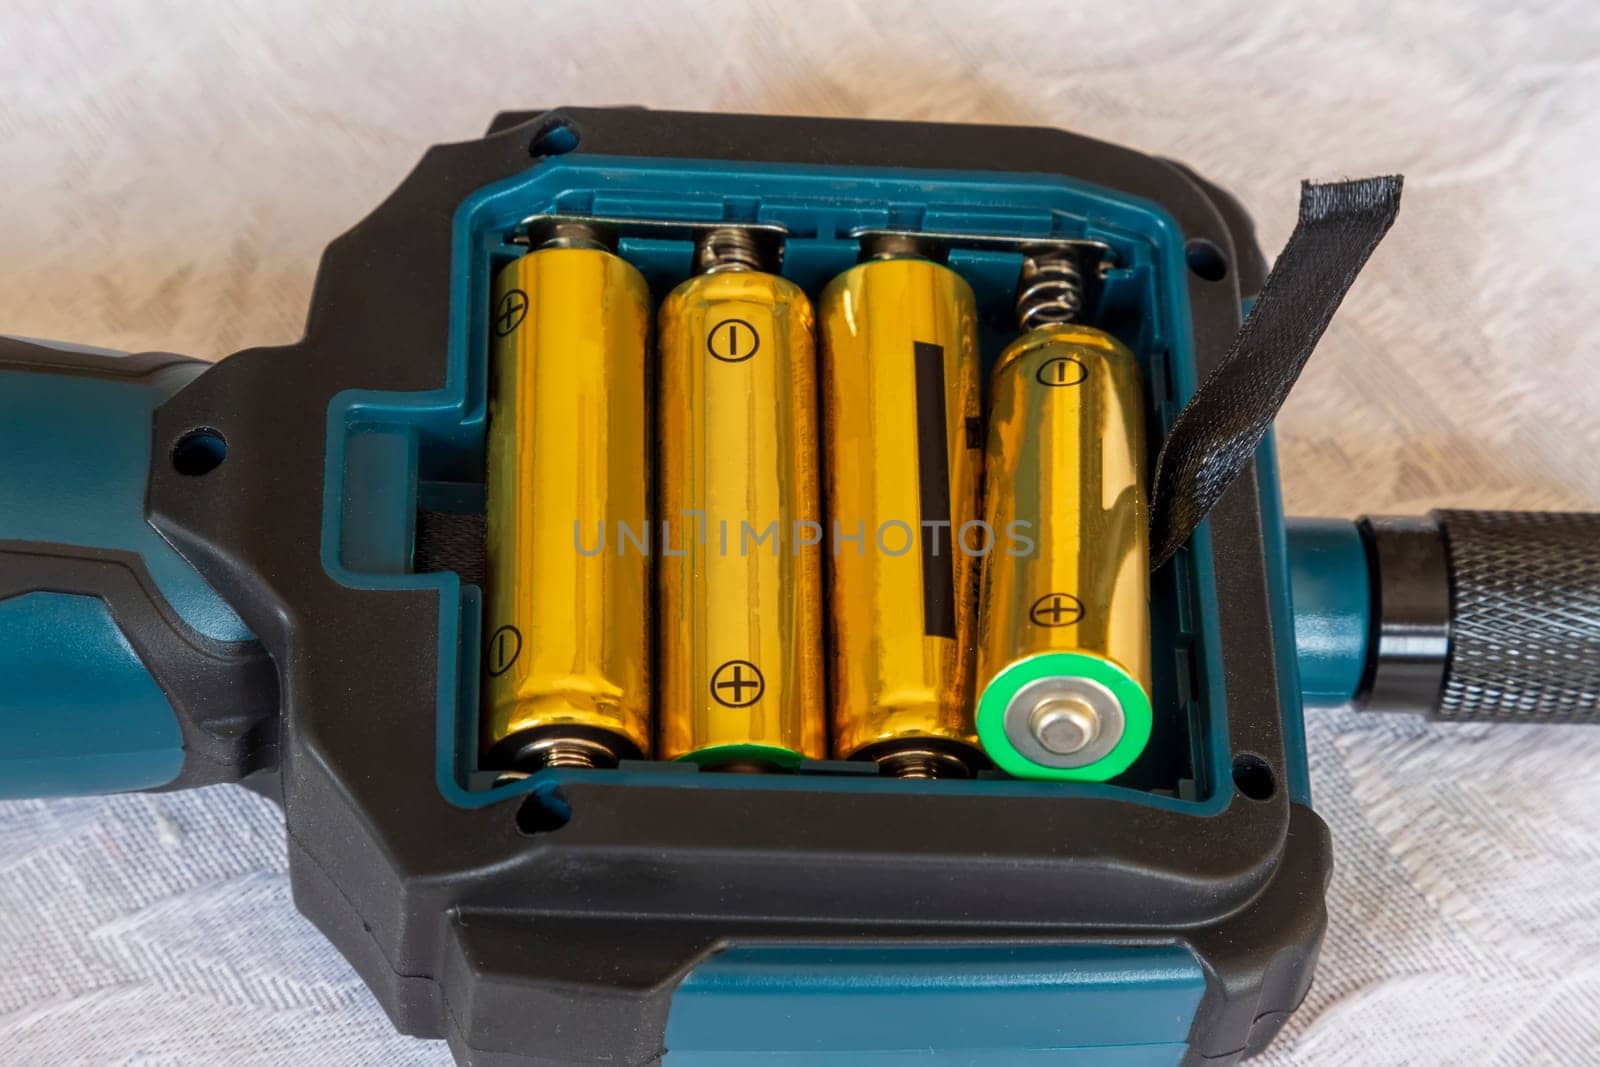 putting new batteries in a device or replacement by EdVal